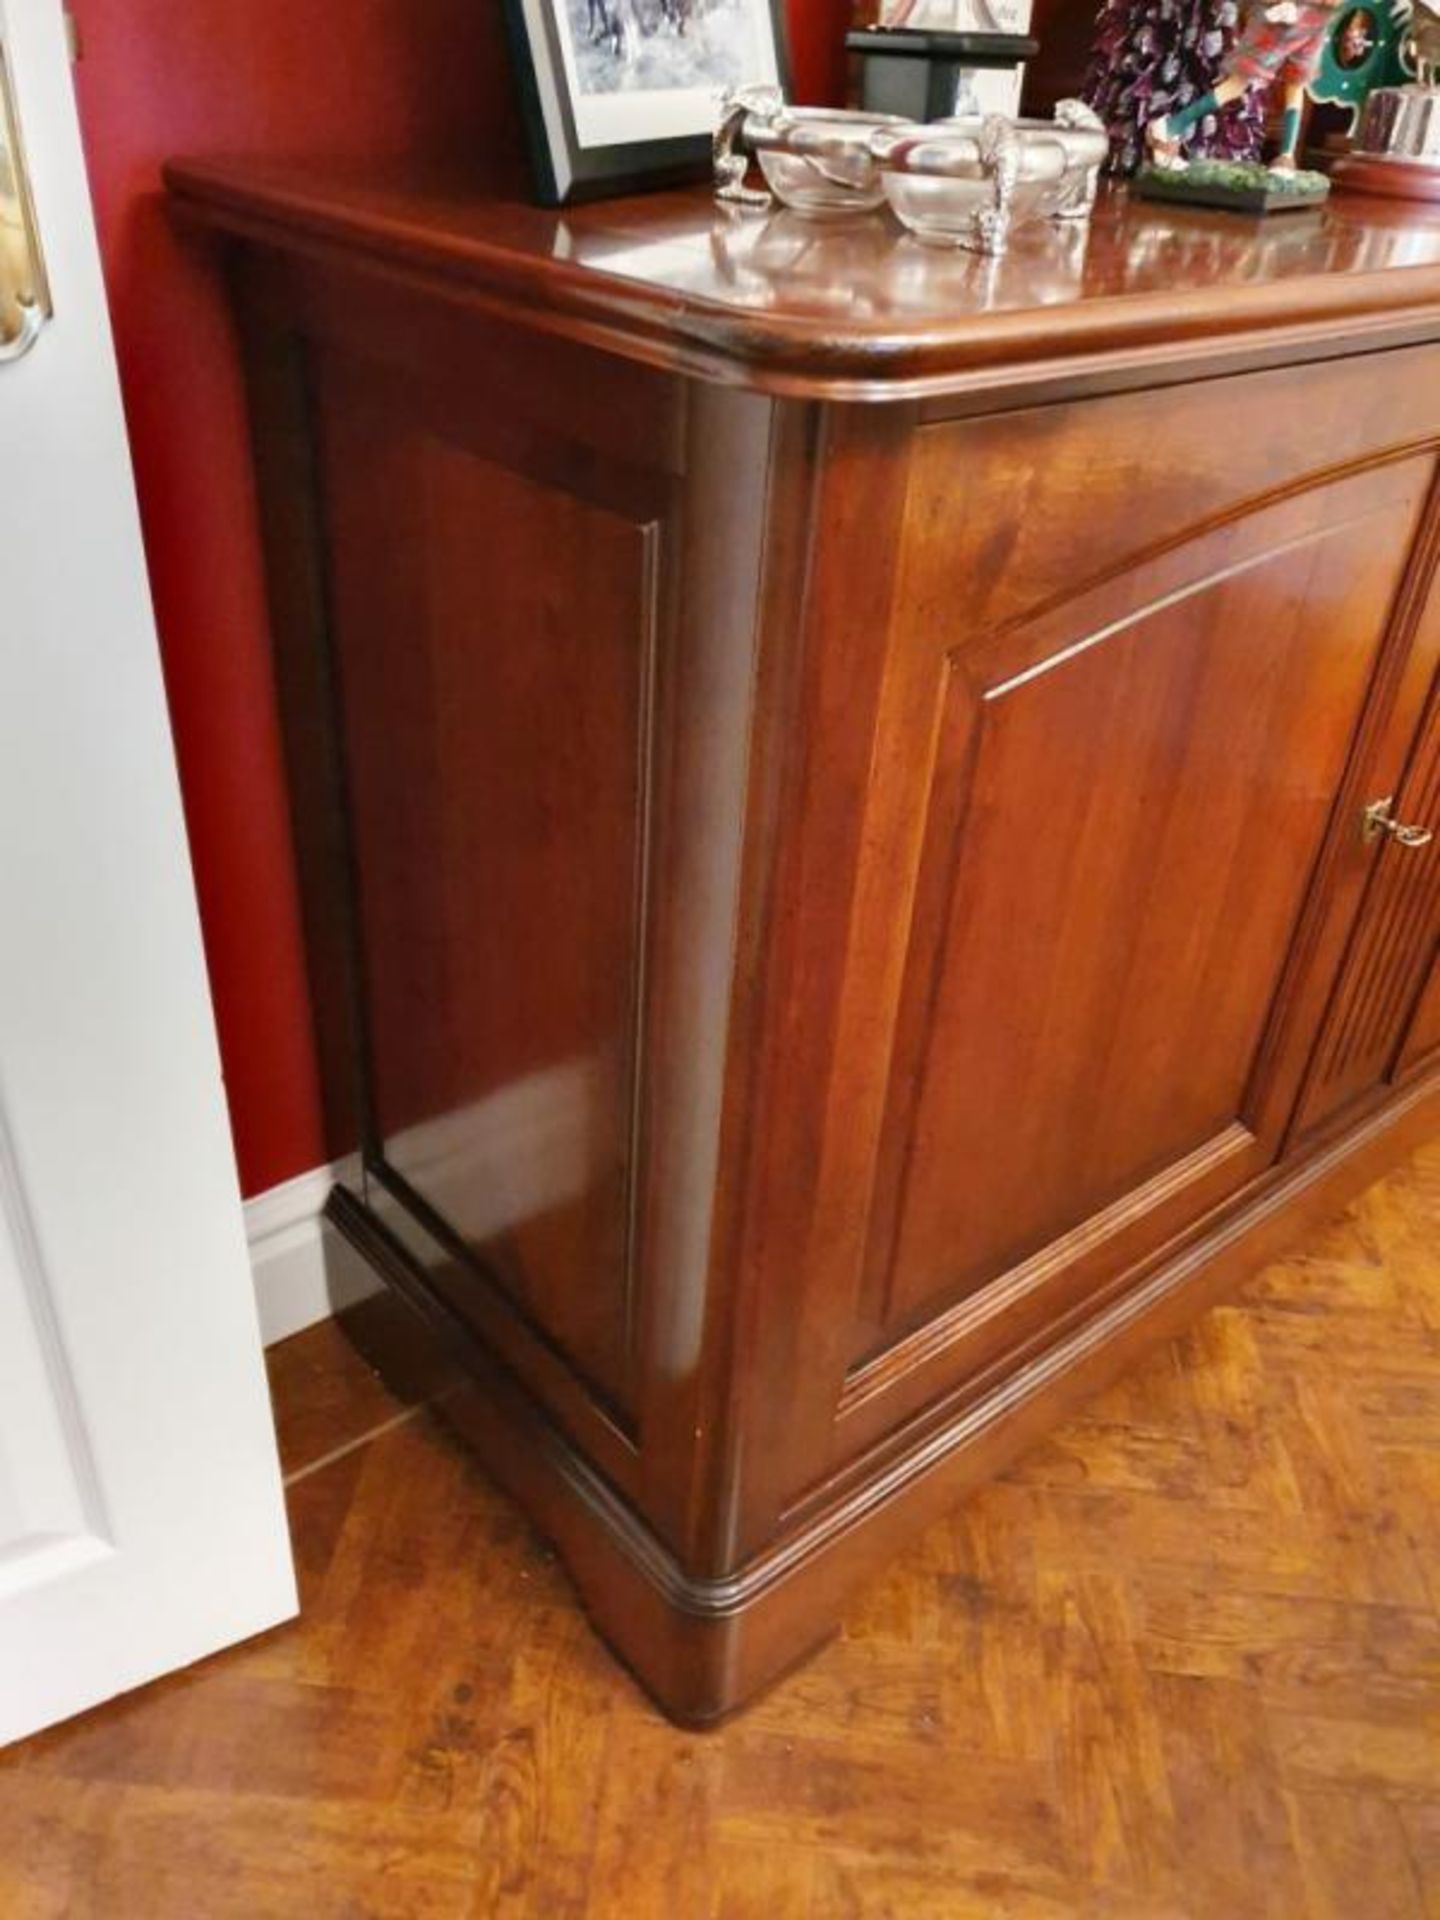 1 x GRANGE Sideboard in Cherry Wood - CL473 - Location: Bowdon WA14 - NO VAT ON HAMMER - Used In Exc - Image 4 of 16